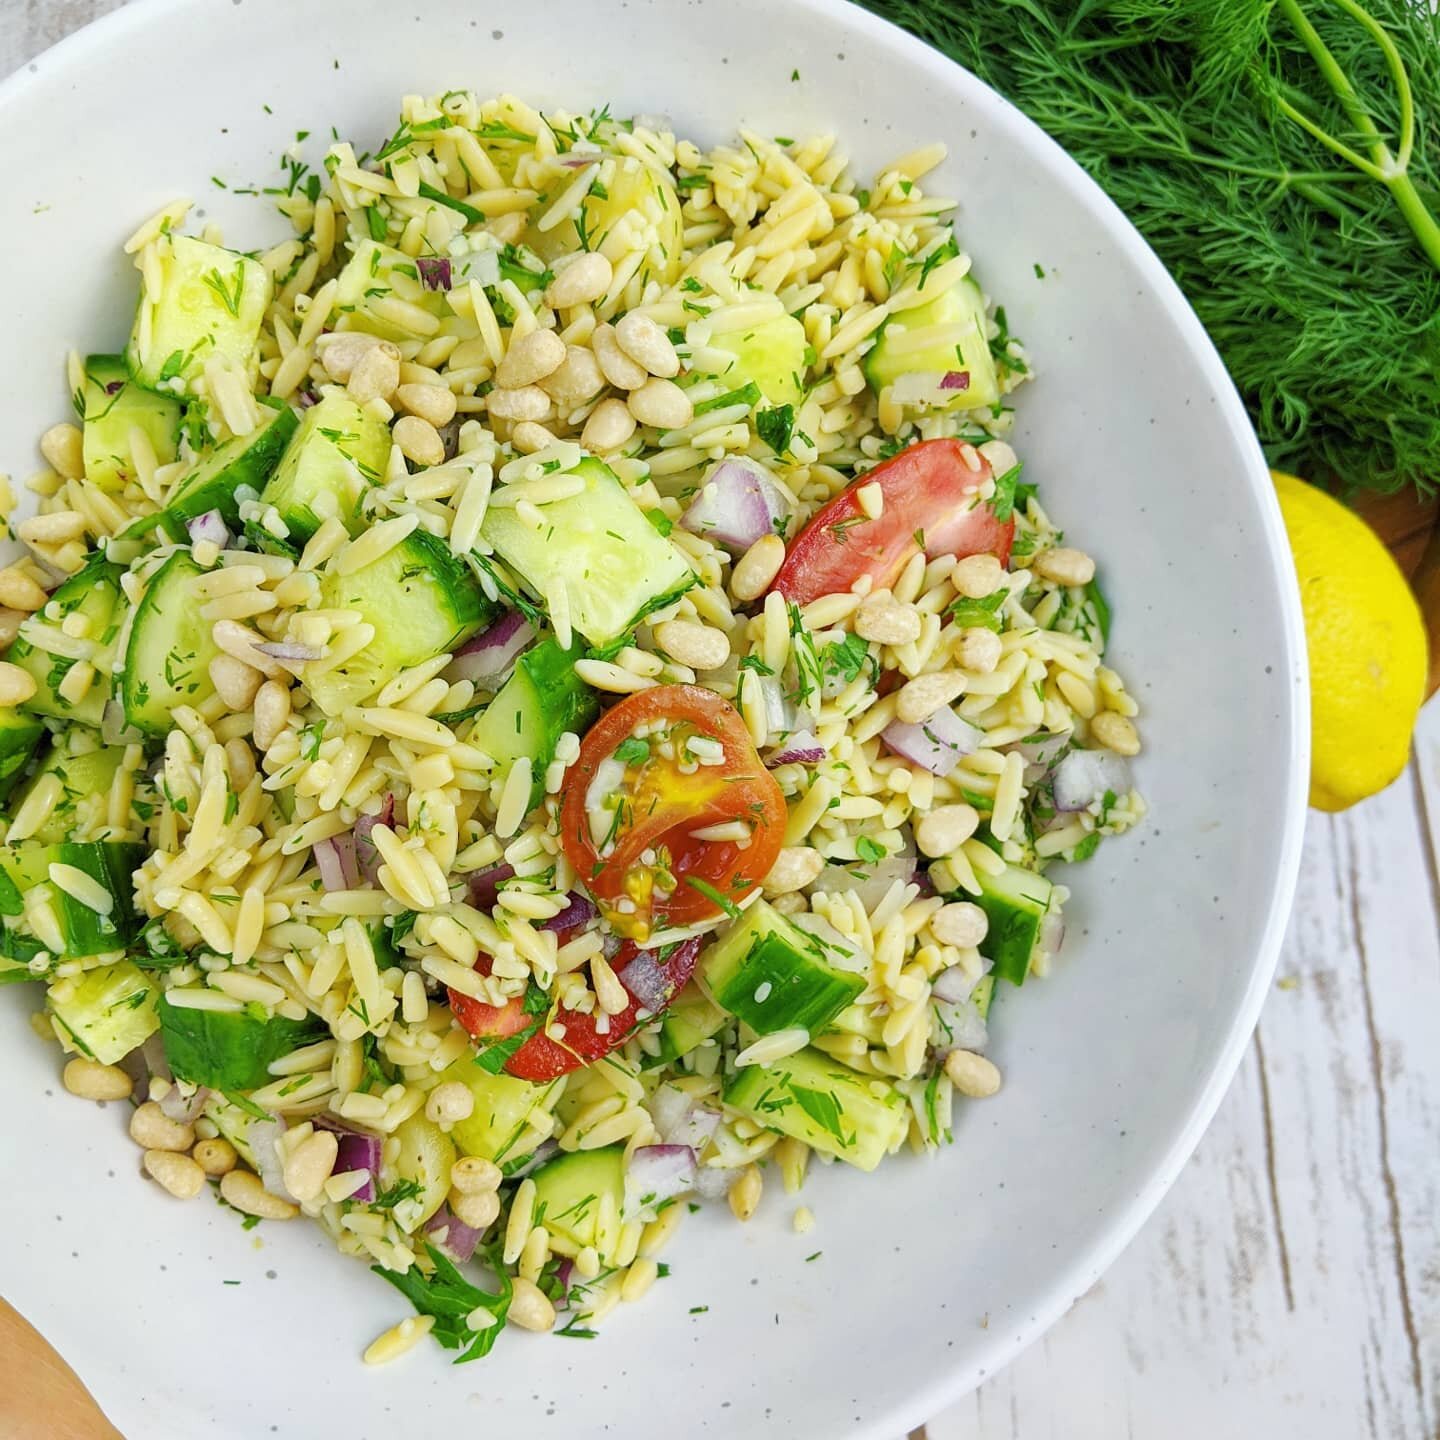 Tomato Cucumber Orzo Salad
.
Need a simple dinner for @meatlessmonday ?
Want a quick, healthy lunch?
This is it! 
🍅🥒🍋
Use @eatbanza chickpea rice to pack the #veganprotein and keep it #glutenfreepasta 
.
Ingredients:
3/4 cup @eatbanza chickpea ric